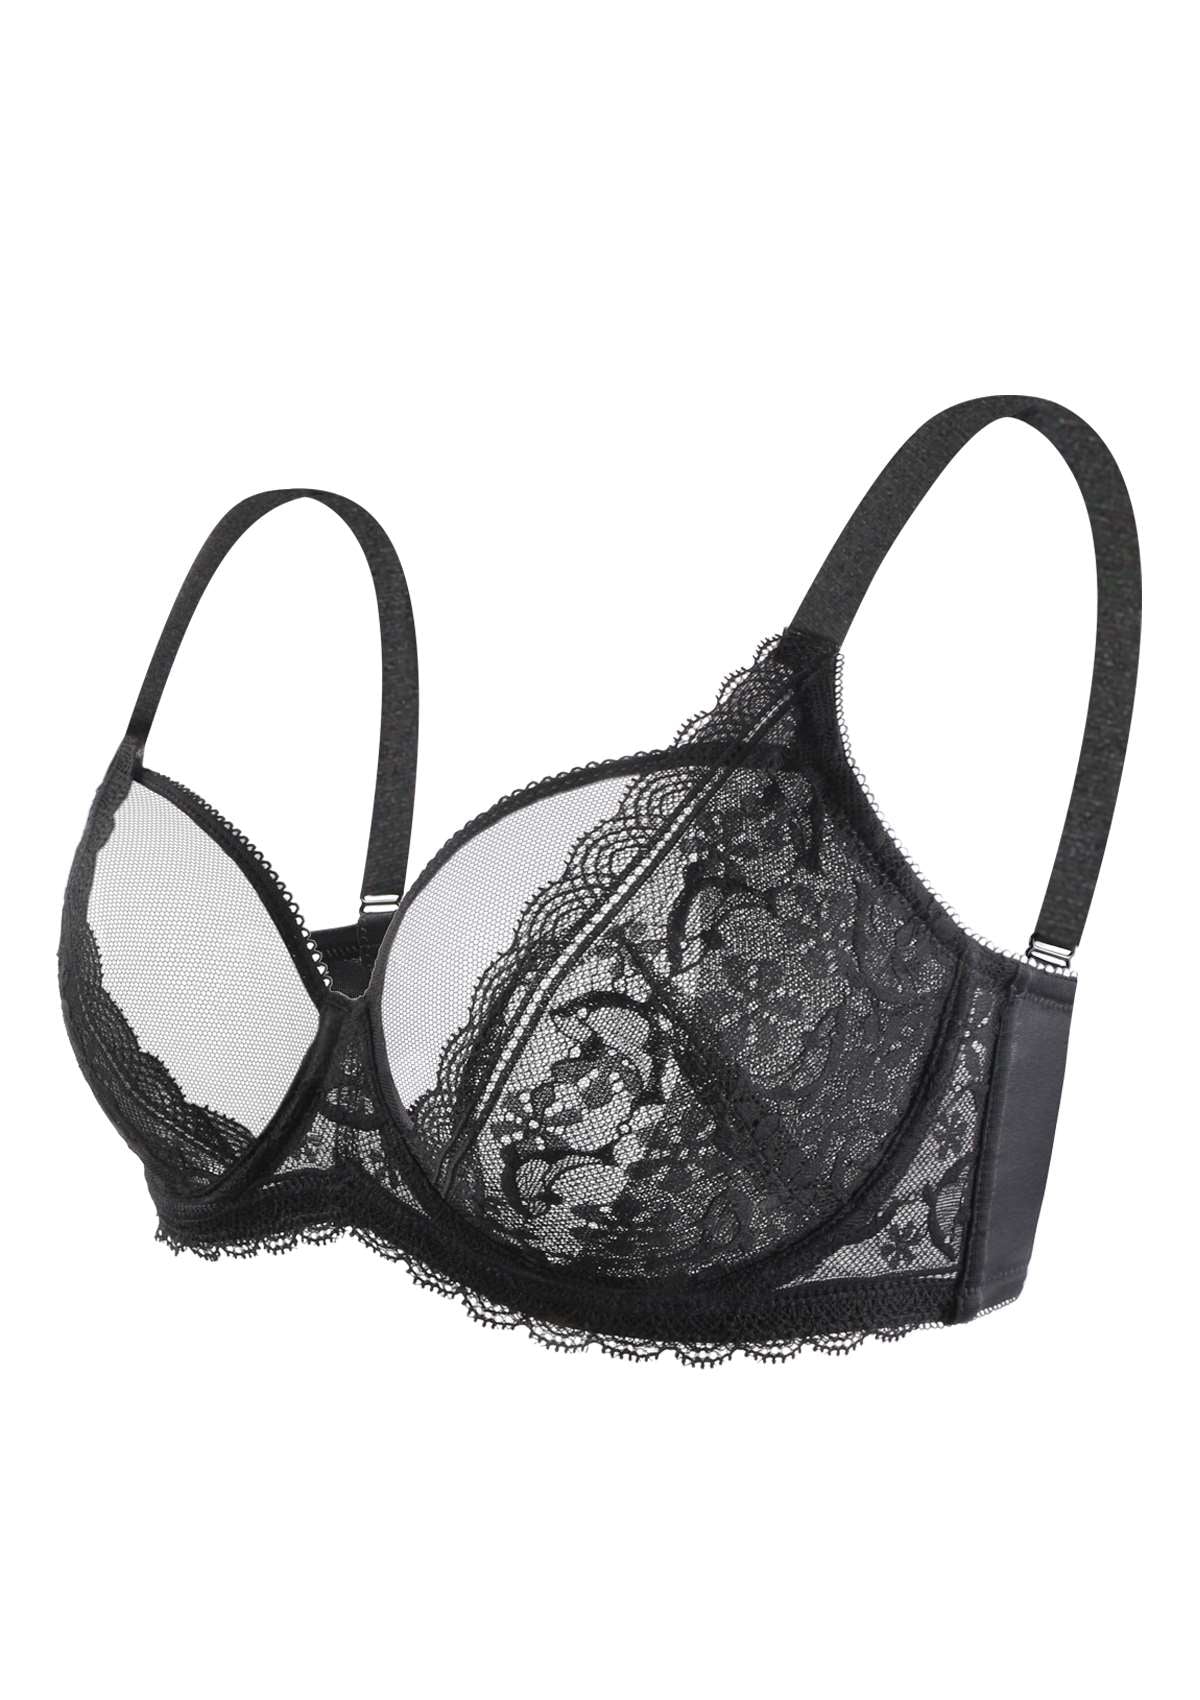 HSIA Anemone Lace Bra And Panties: Back Support Wired Bra - Black / 34 / D